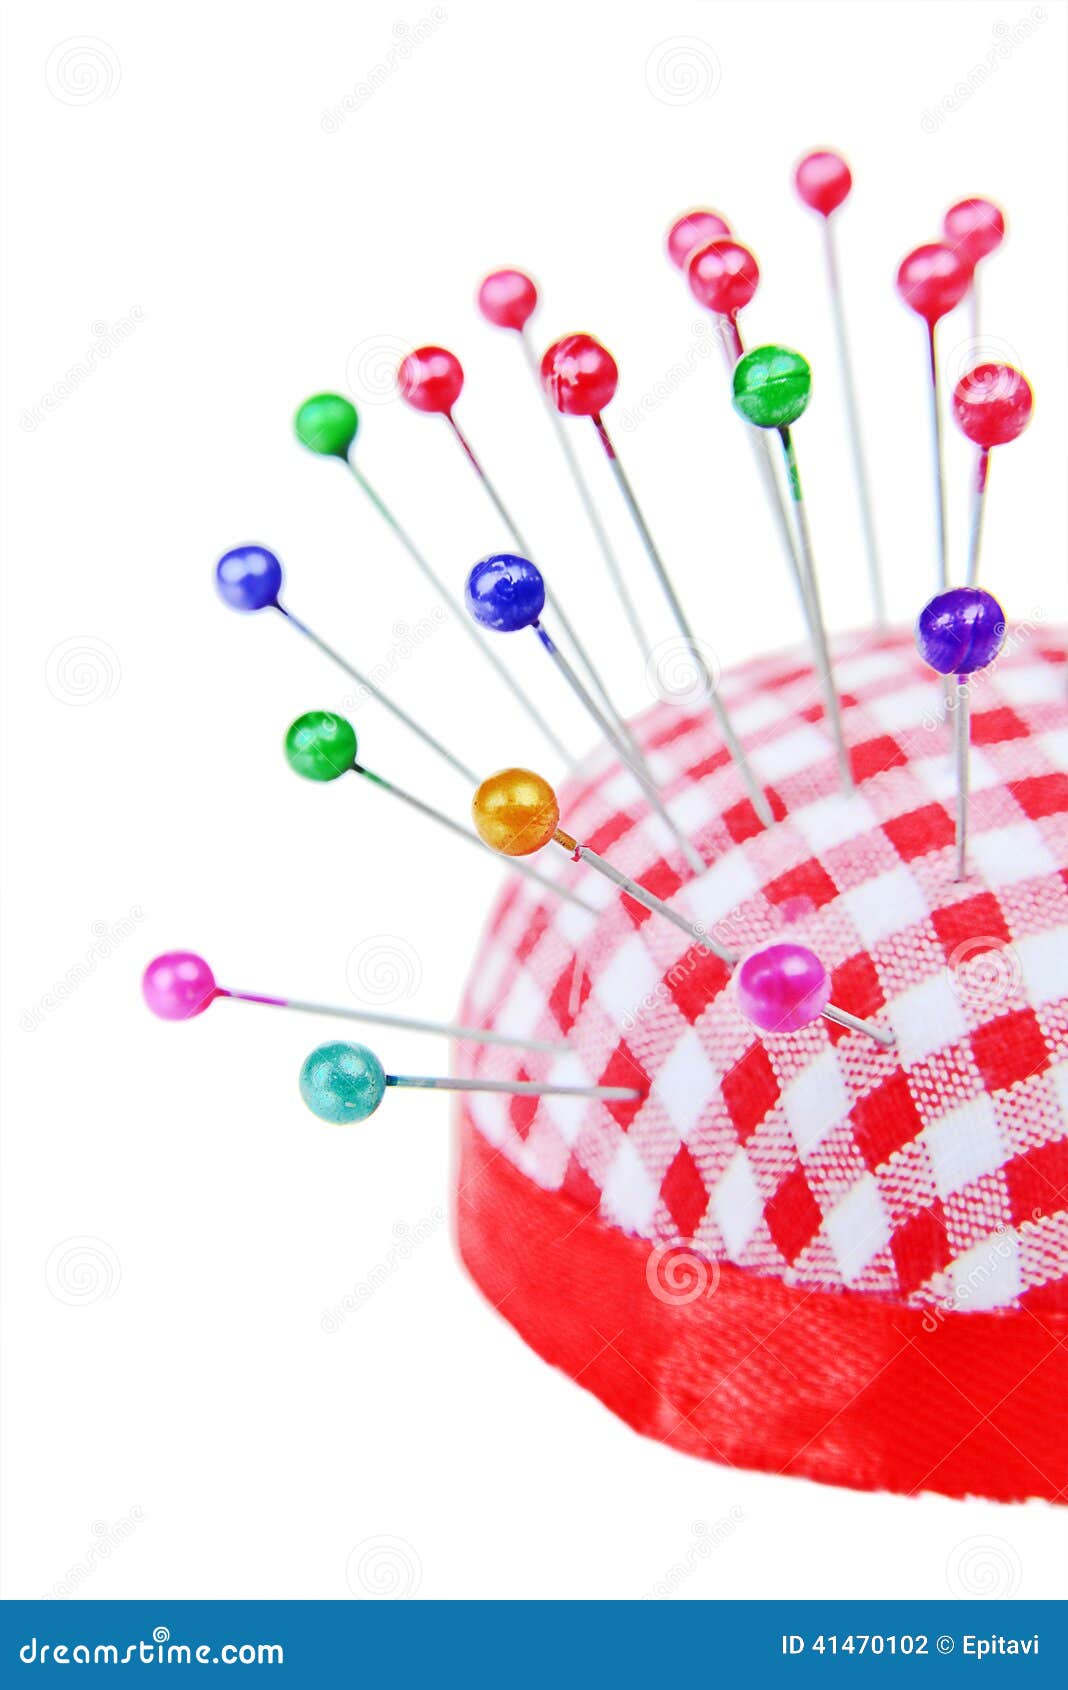 Pins Stuck into the Pincushion Stock Photo - Image of isolation ...